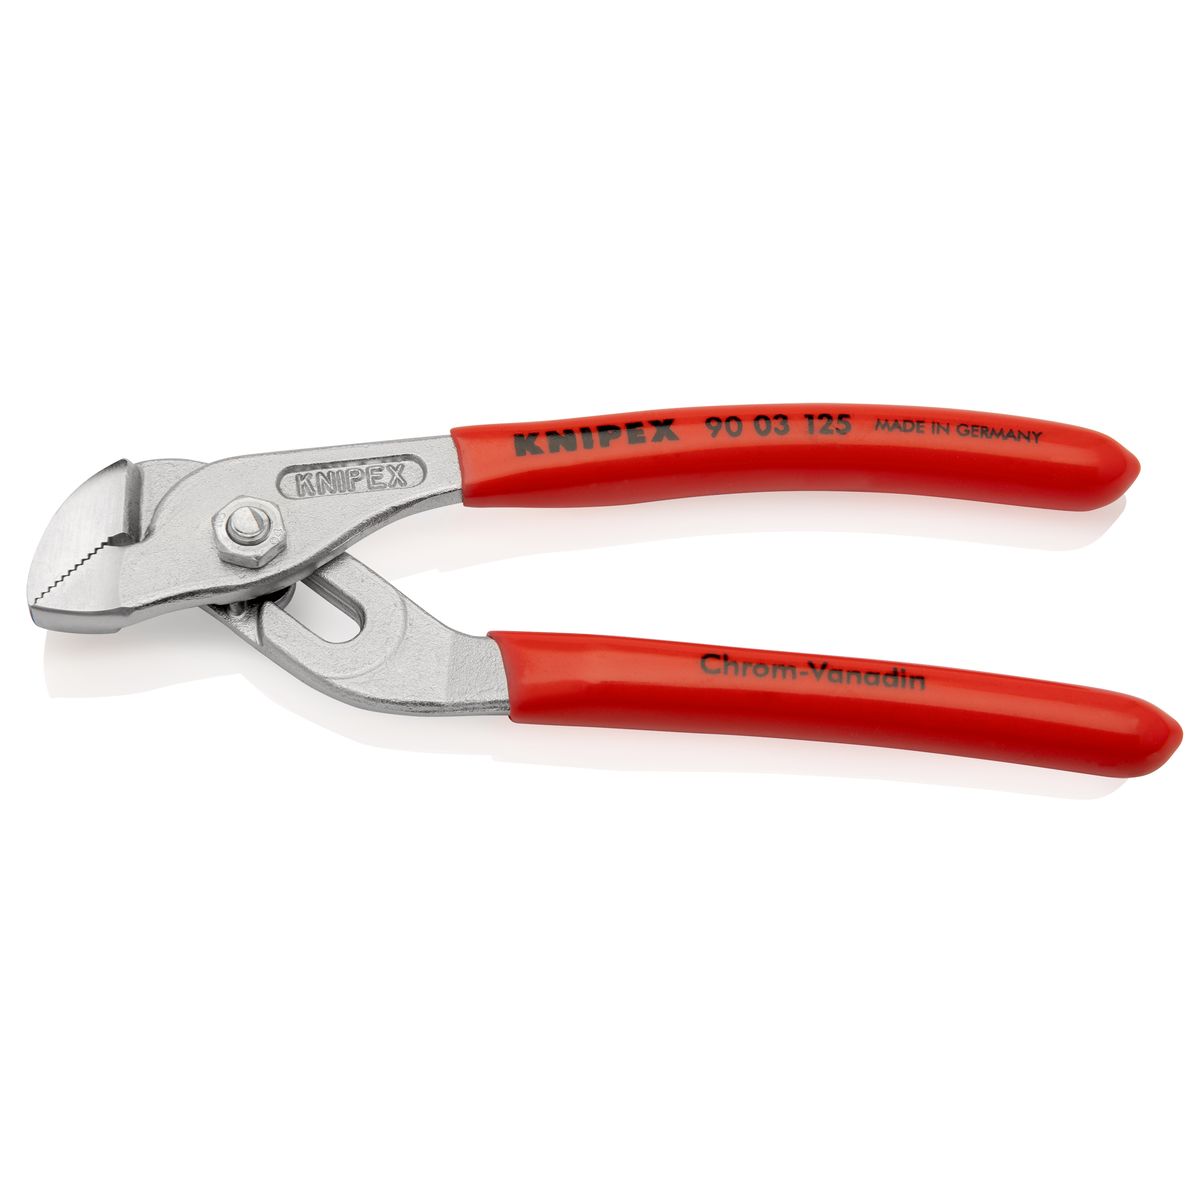 SMALL WATER PUMP PLIERS 9003125 Knipex